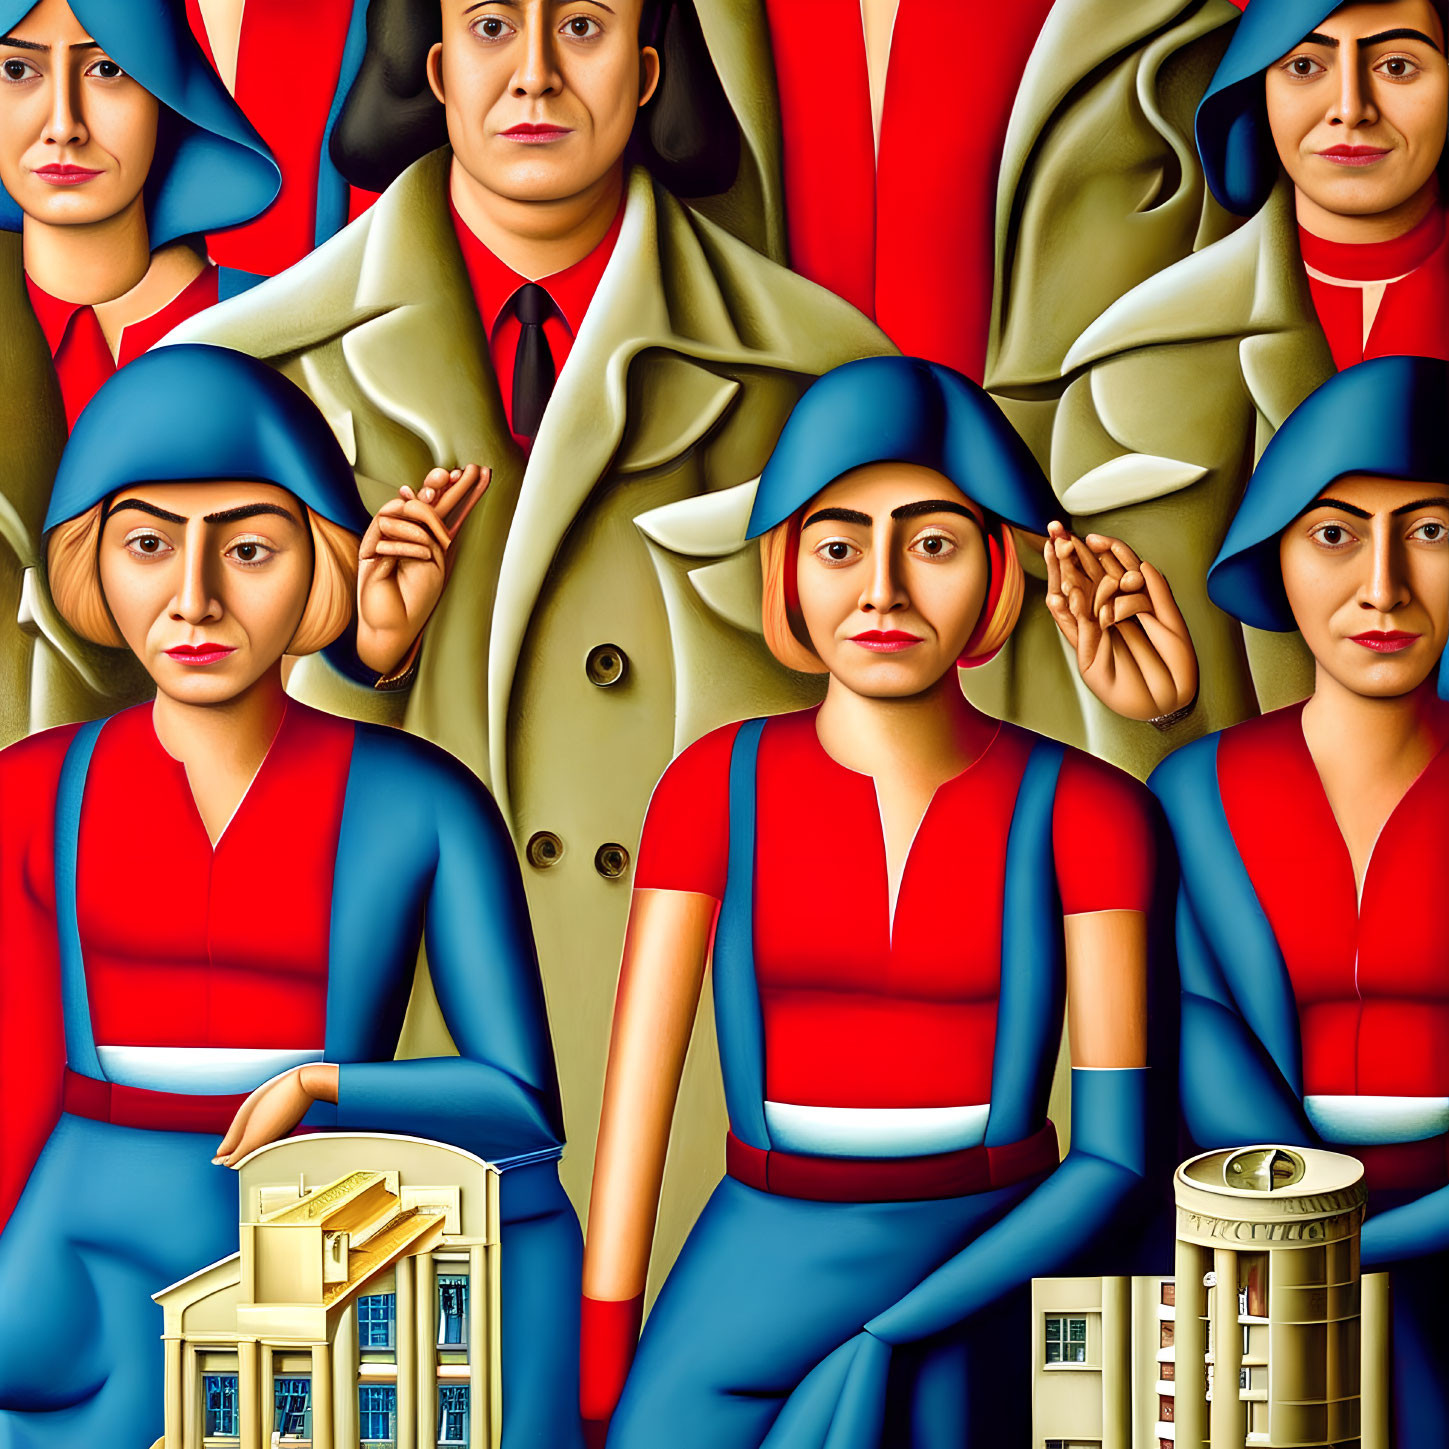 Stylized illustration of female figures in red and blue uniforms saluting with building and blueprints,